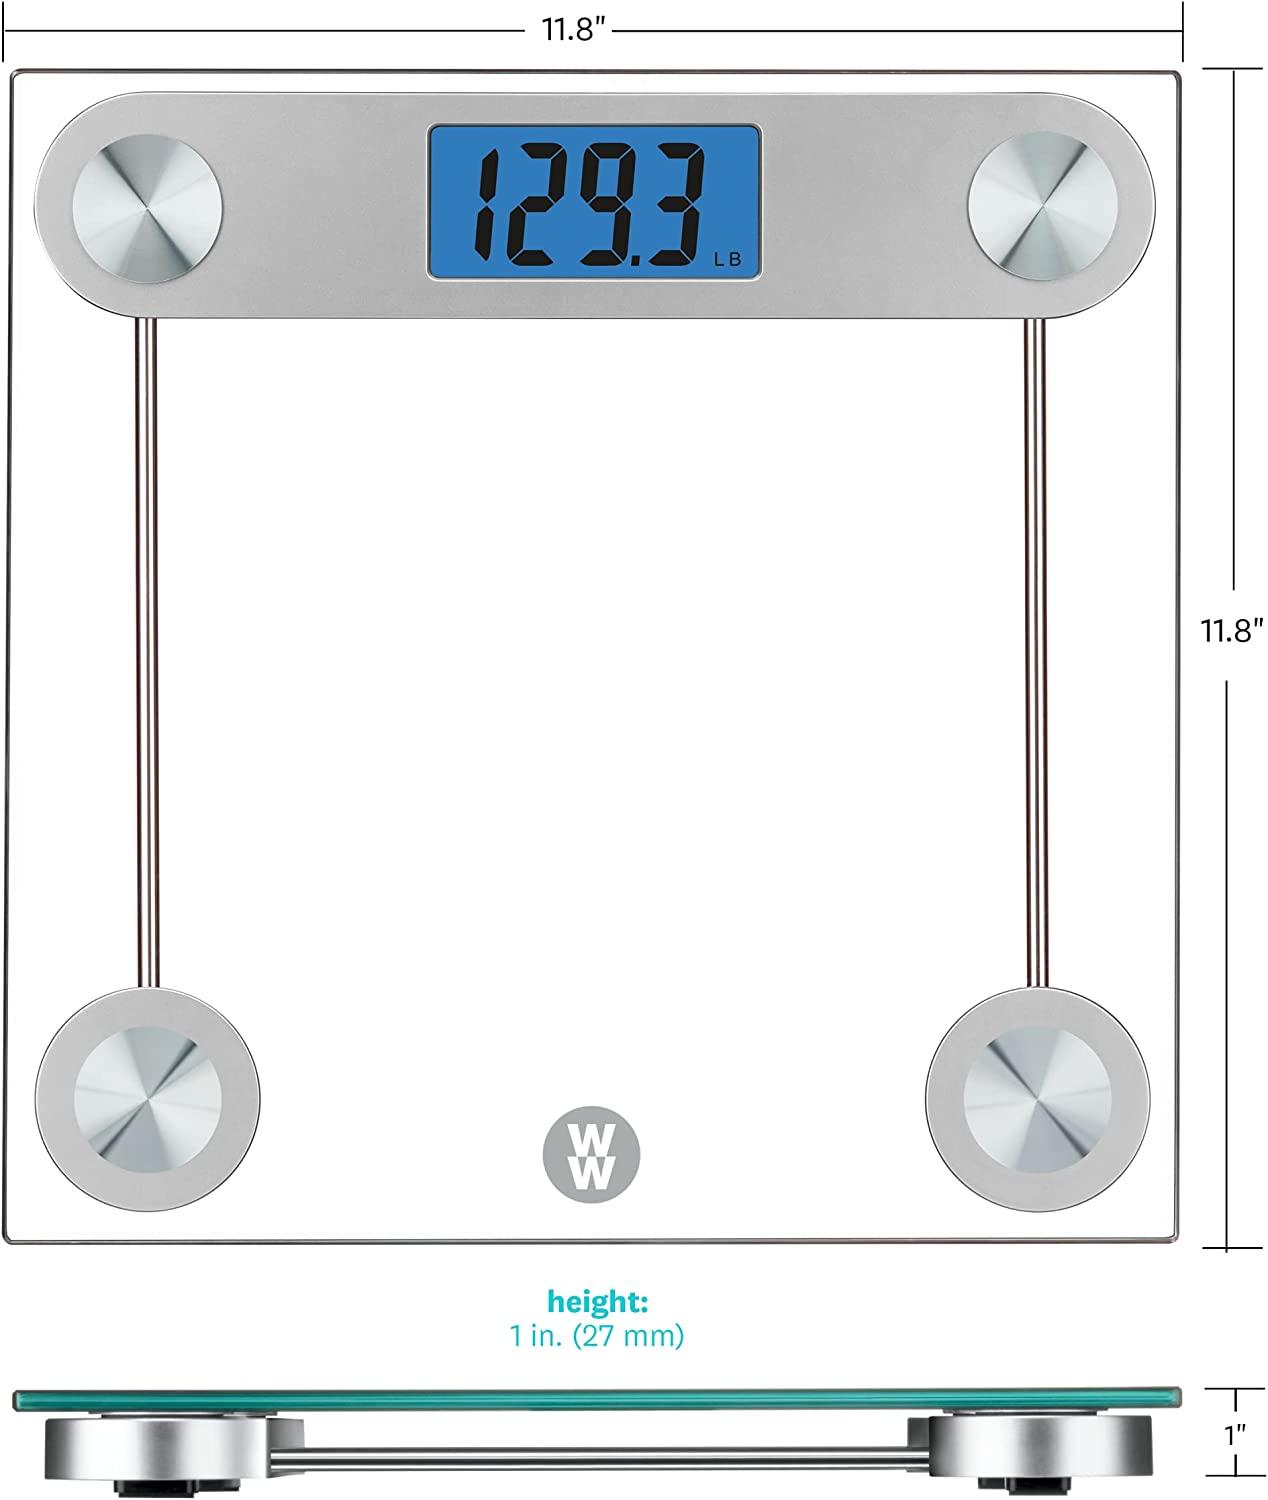 NEW CONAIR WEIGHT WATCHERS GLASS ELECTRONIC SCALE - health and